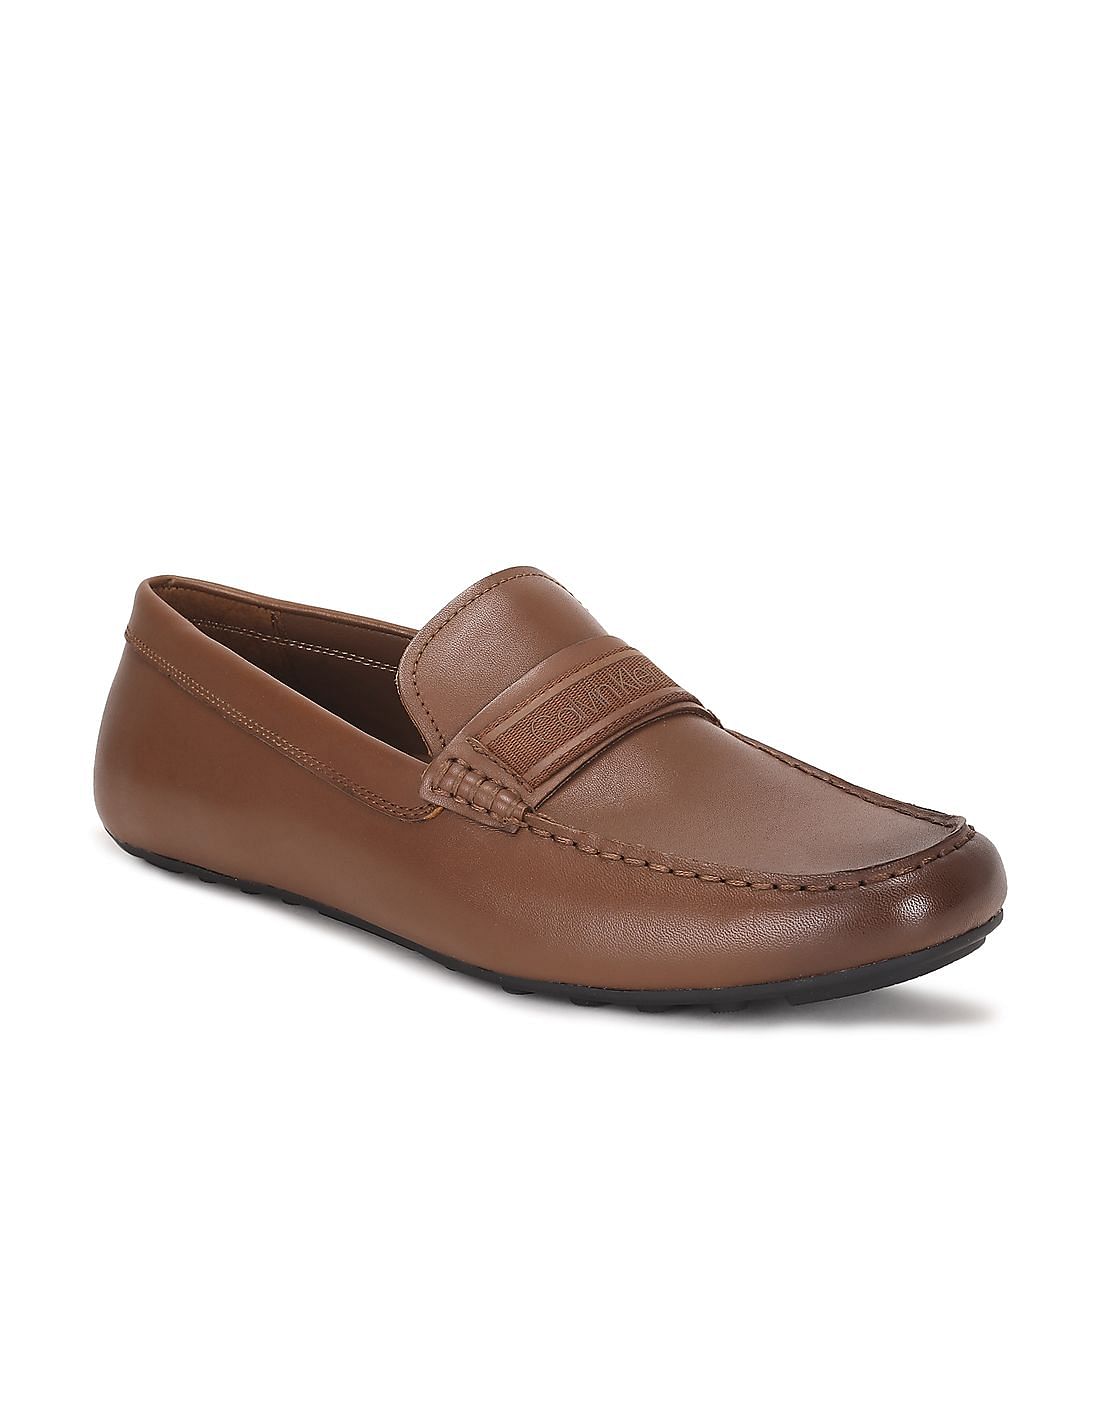 Buy Calvin Klein Men Brown Square Toe Loafers - NNNOW.com